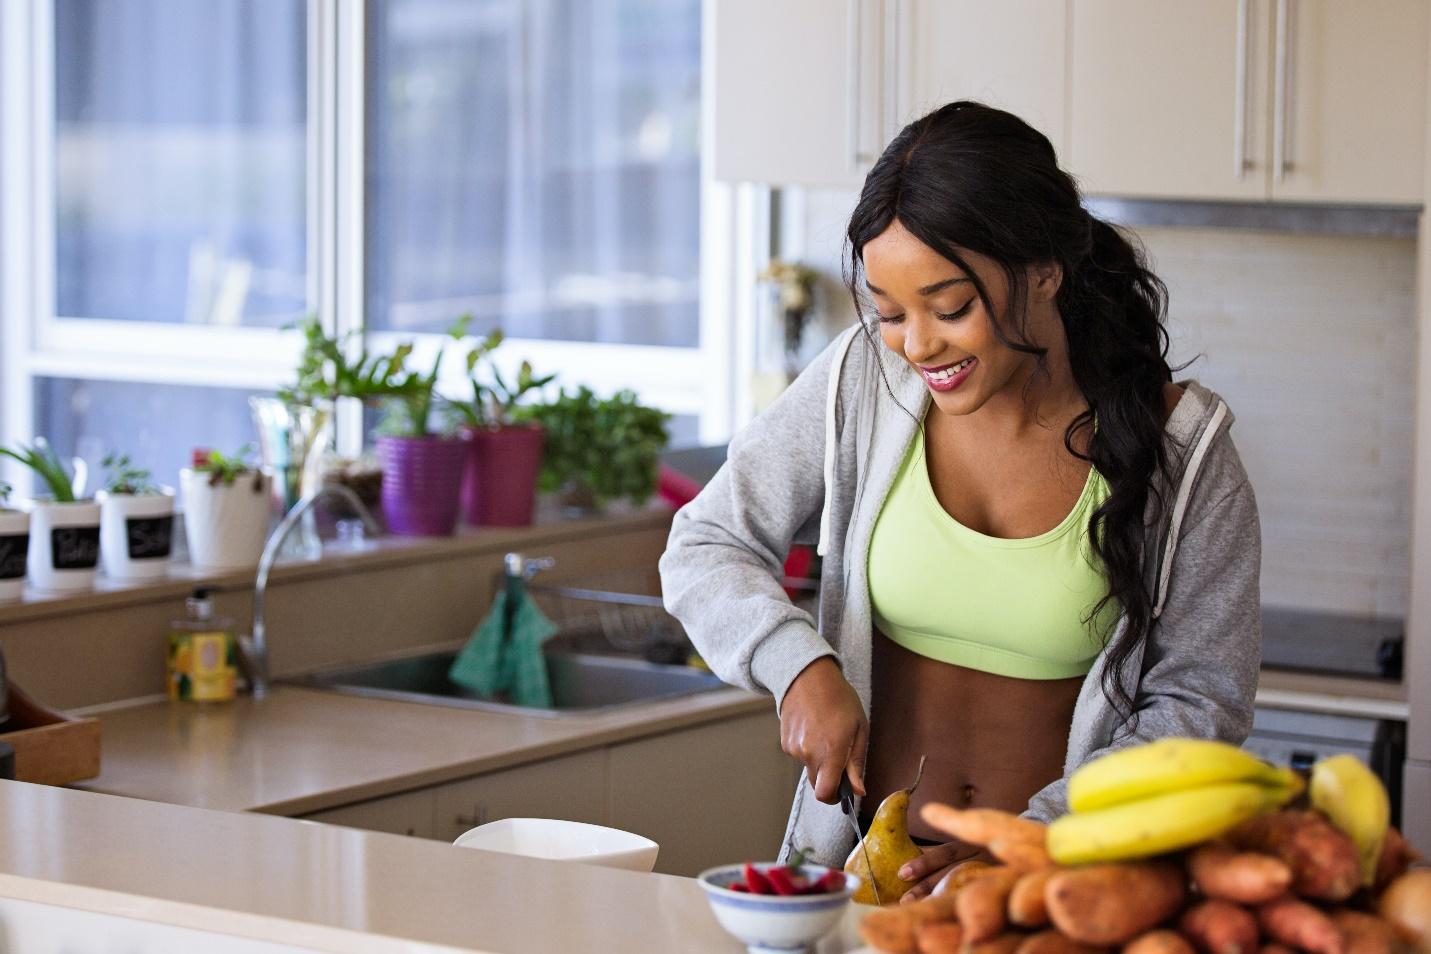 7 Top Advantages of Living a Healthy Lifestyle